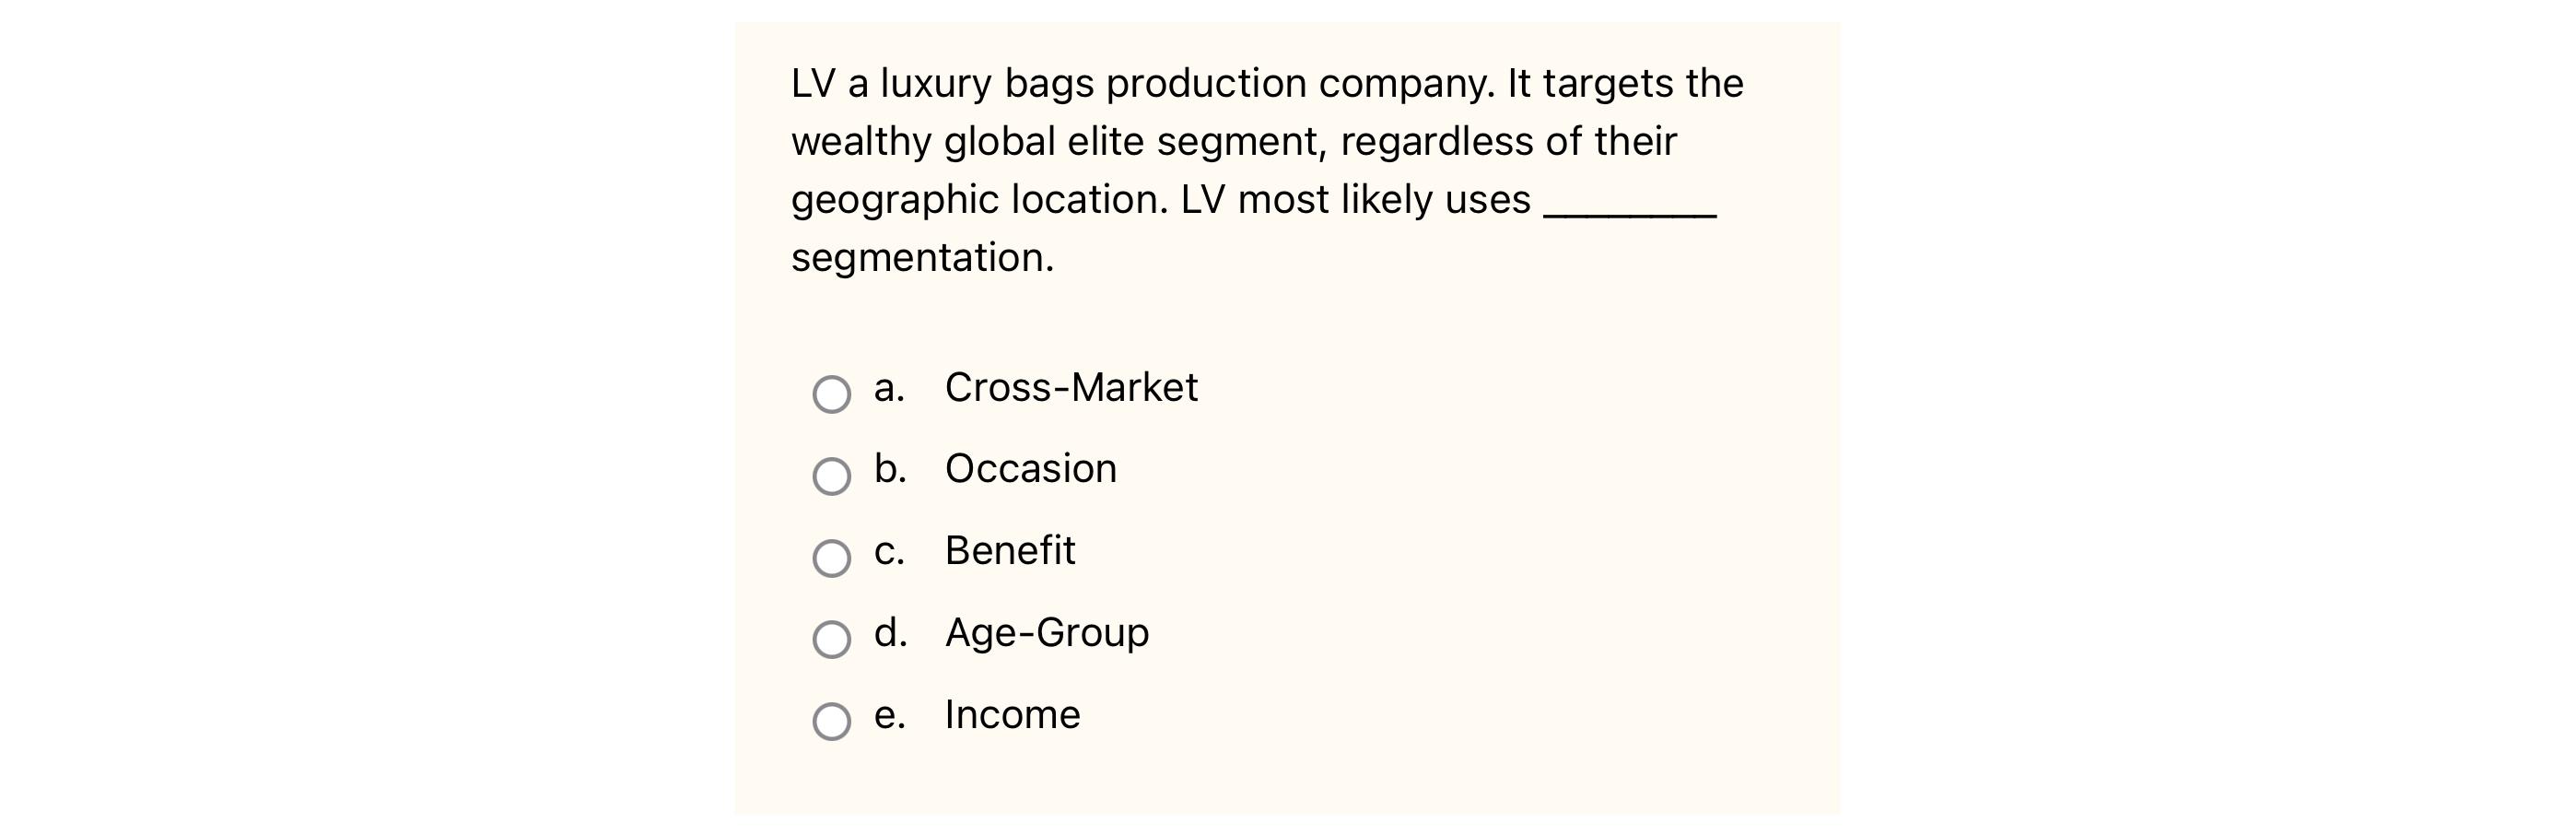 LV a luxury bags production company. It targets the wealthy global elite segment, regardless of their